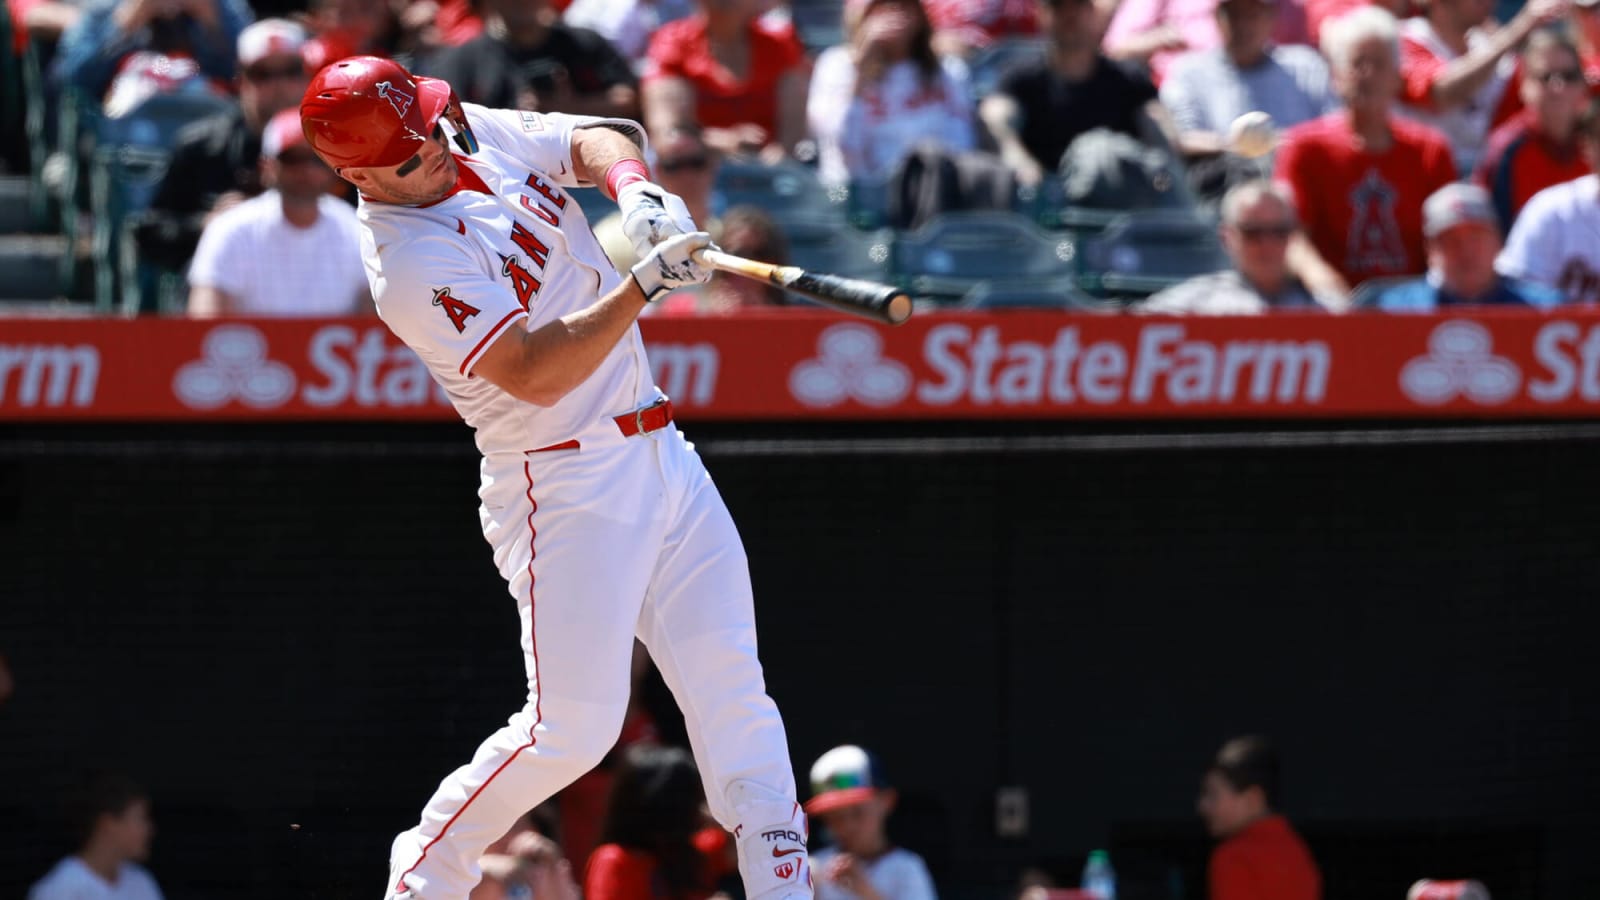 MLB Notebook: Mike Trout to miss time after knee surgery, Aaron Boone confident in Judge despite early struggles, and more